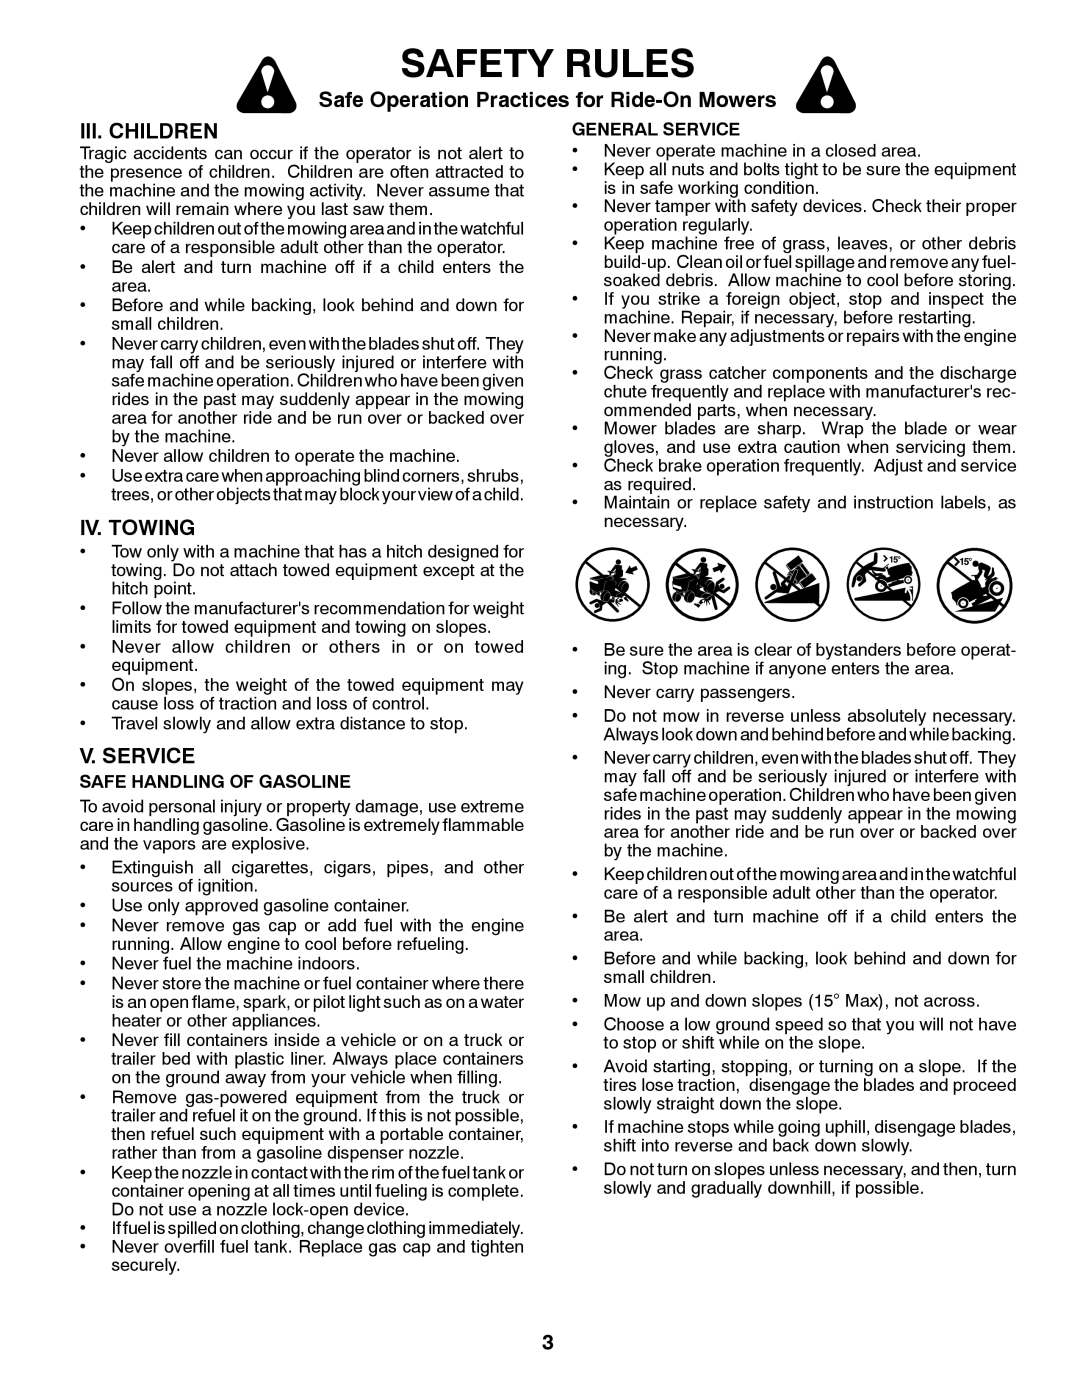 McCulloch 96041018000 Safety Rules, Safe Operation Practices for Ride-On Mowers, Iii. Children, Iv. Towing, V. Service 